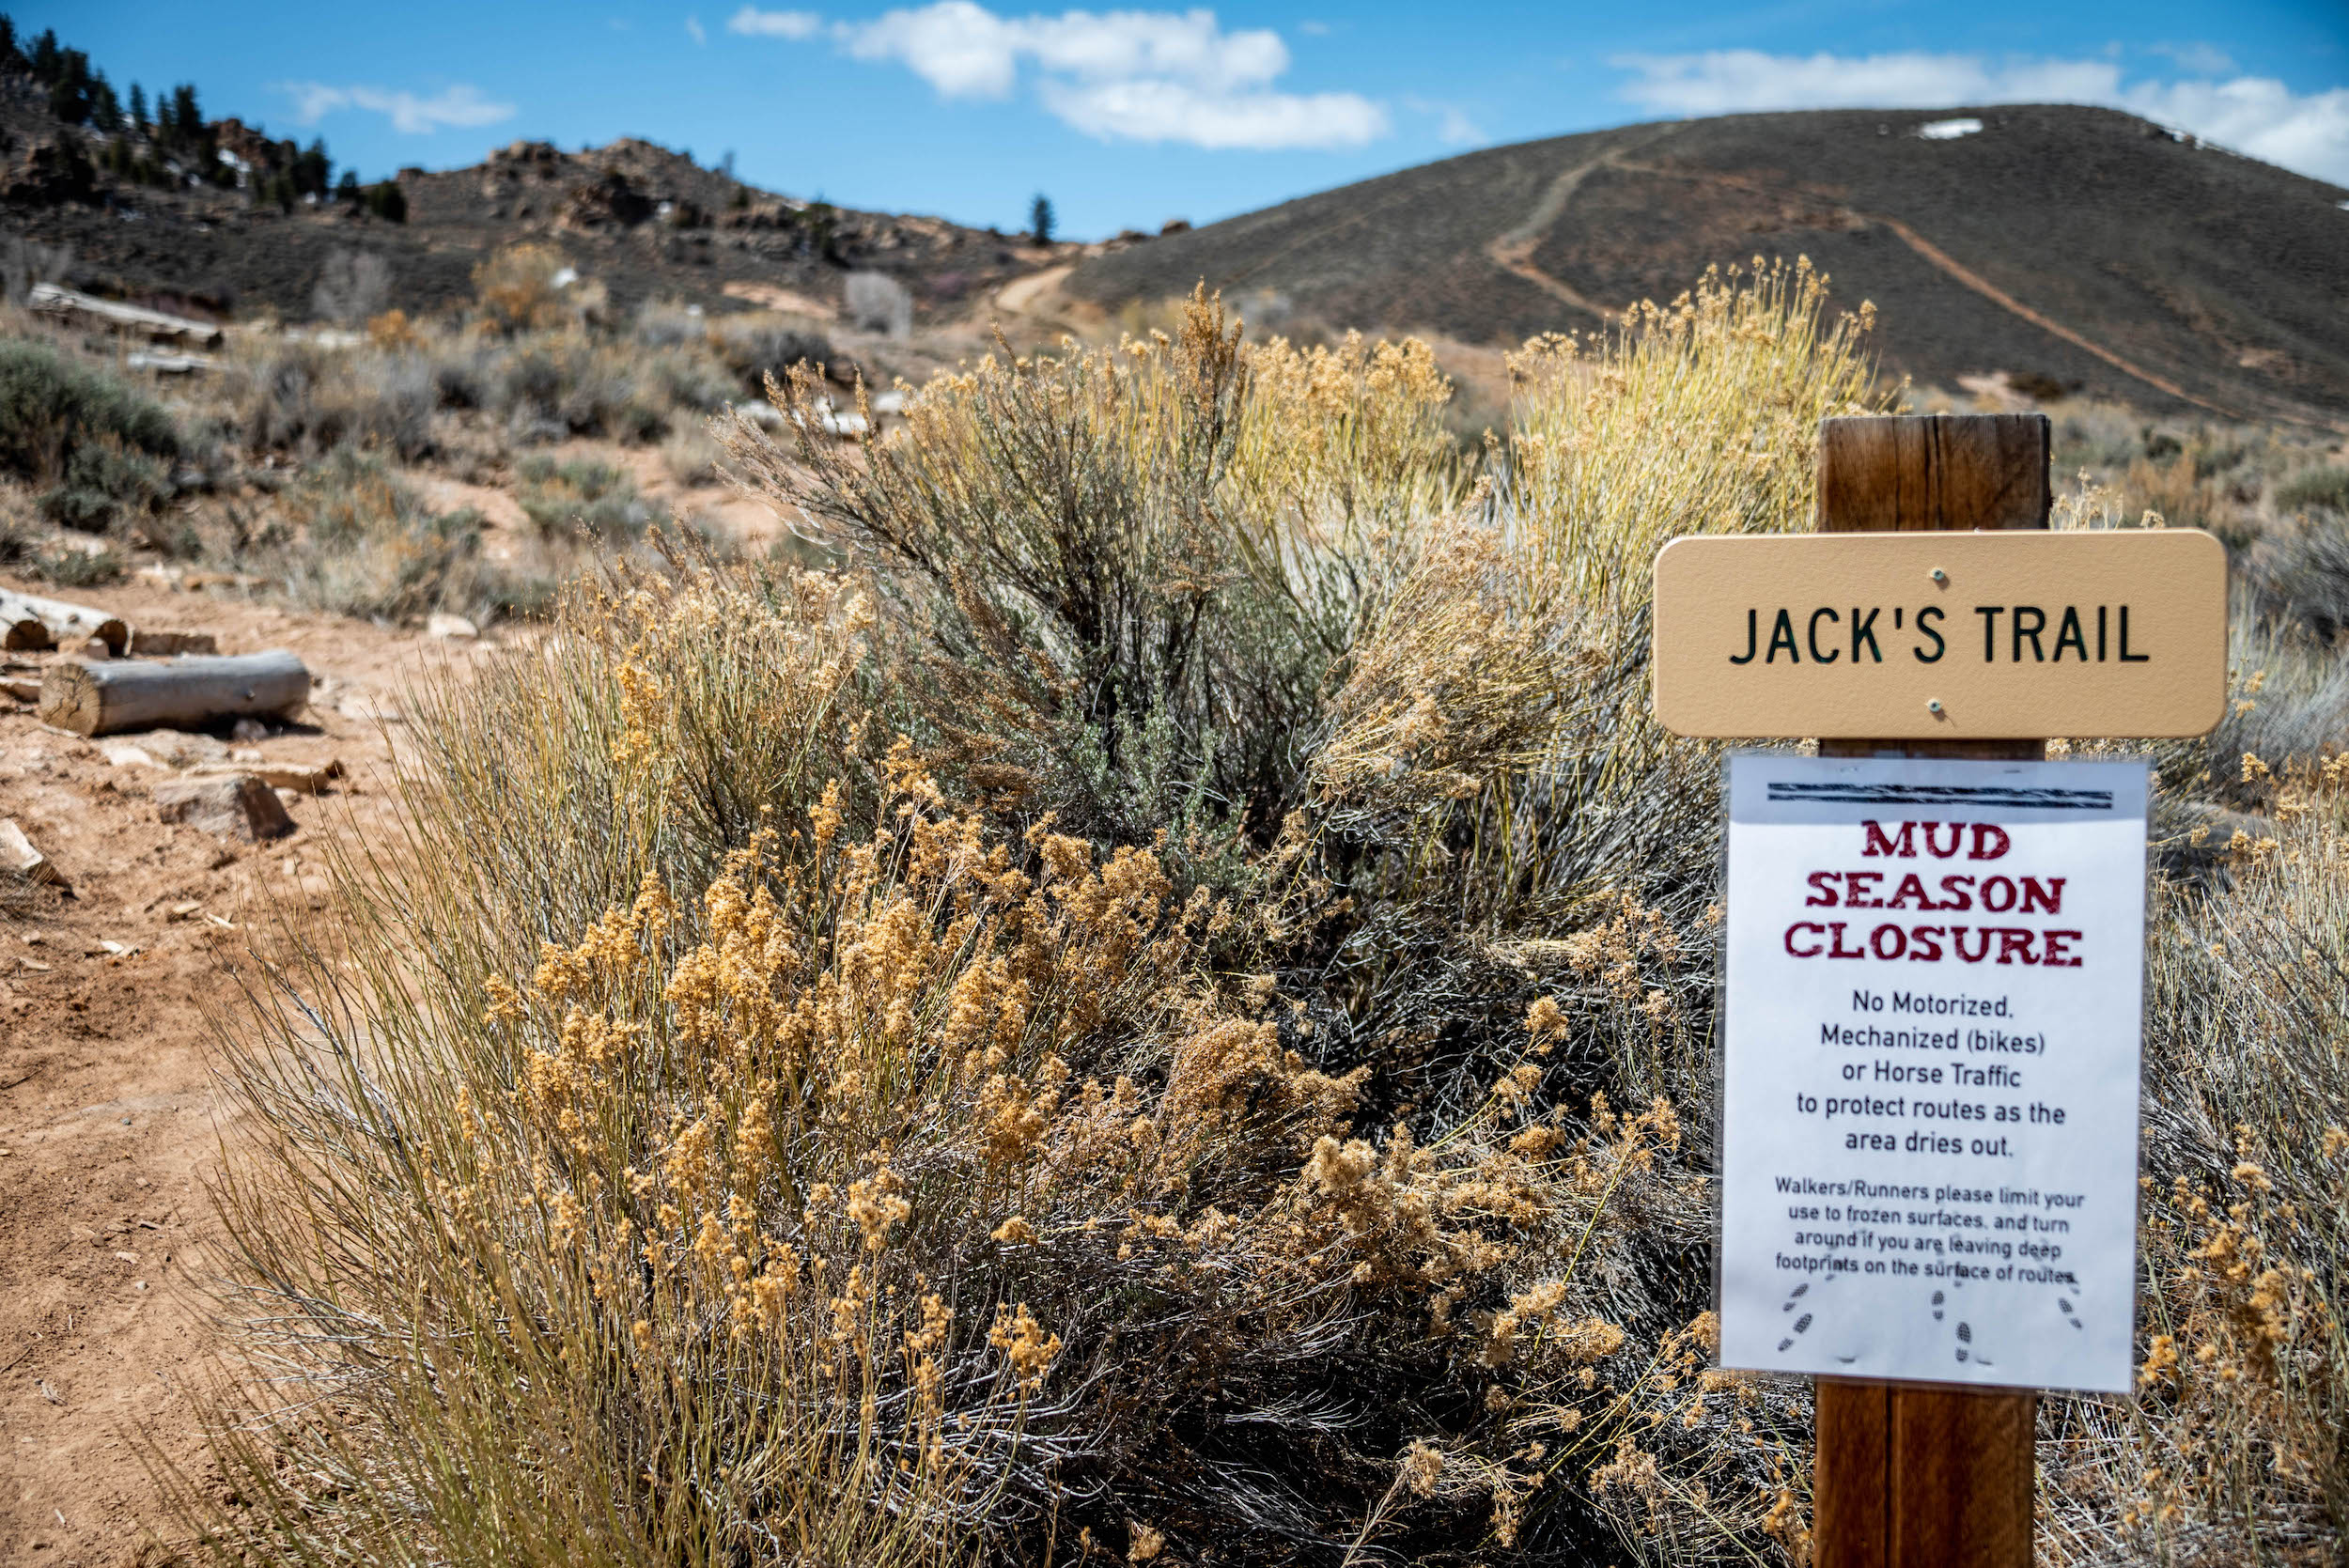 A sign that says "Jack's Trail" with another sign underneath that says "mud season closure." with plants and a hill in the background